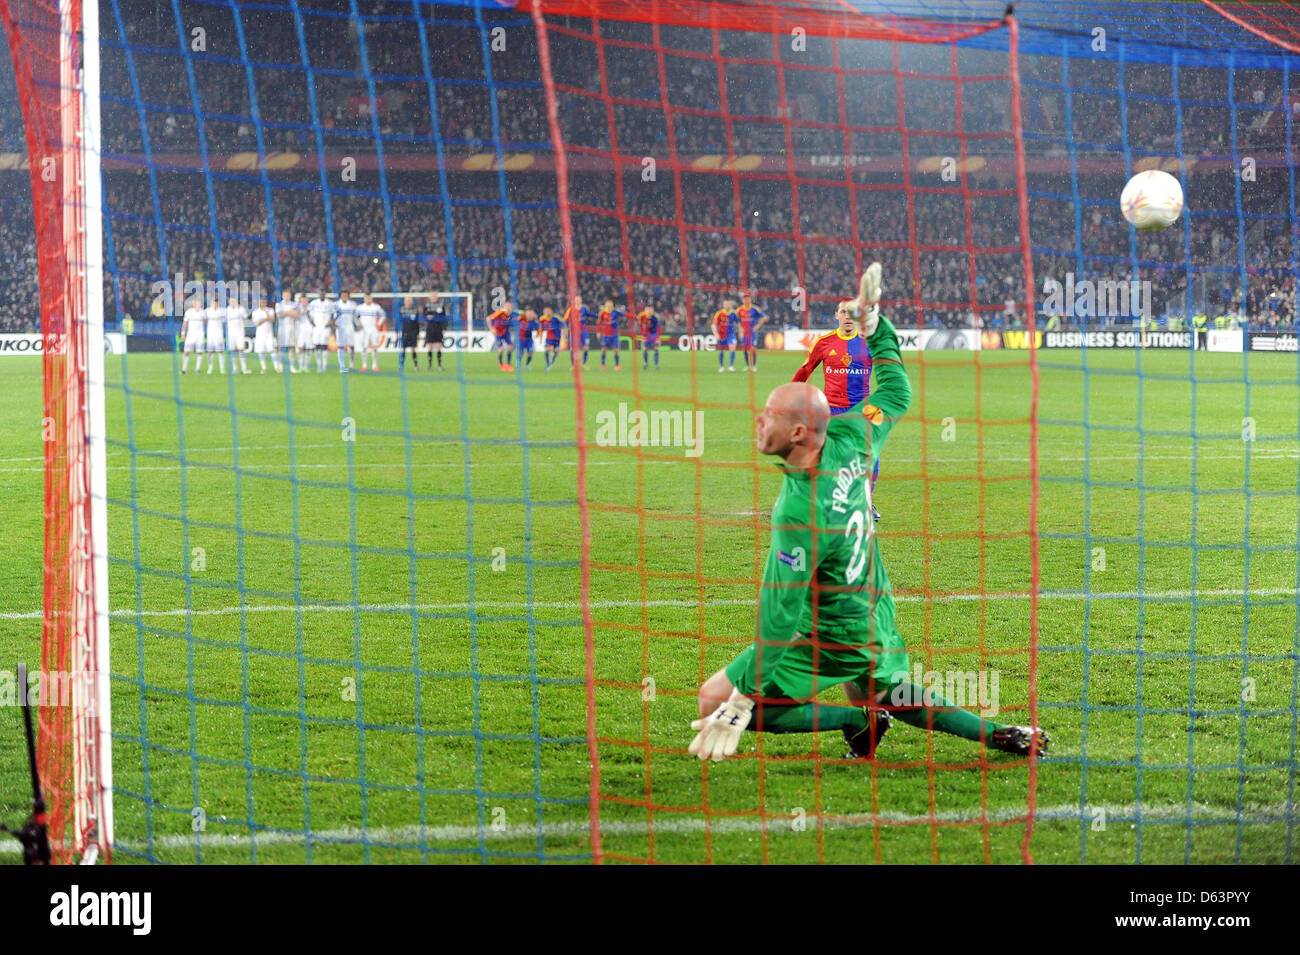 Basel, Switzerland. 11th April 2013. Marcelo Diaz of FC Basel scores the winning penalty in the shootout in the Europa League game between FC Basel and Tottenham Hotspur from St. Jakob-Park. Stock Photo